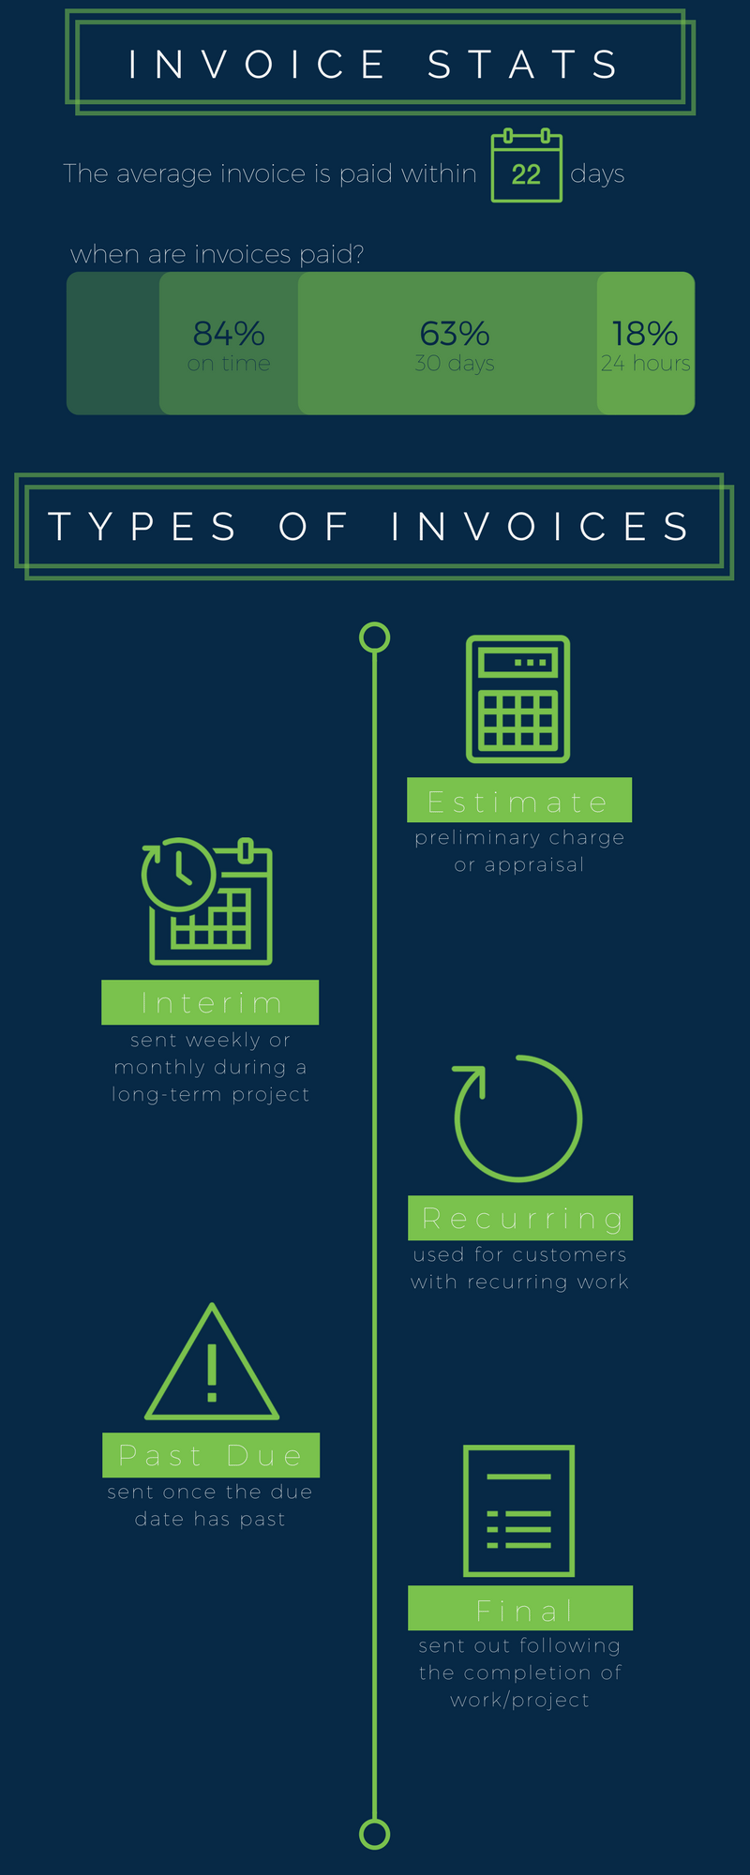 Invoice Infographic PartI (2).png